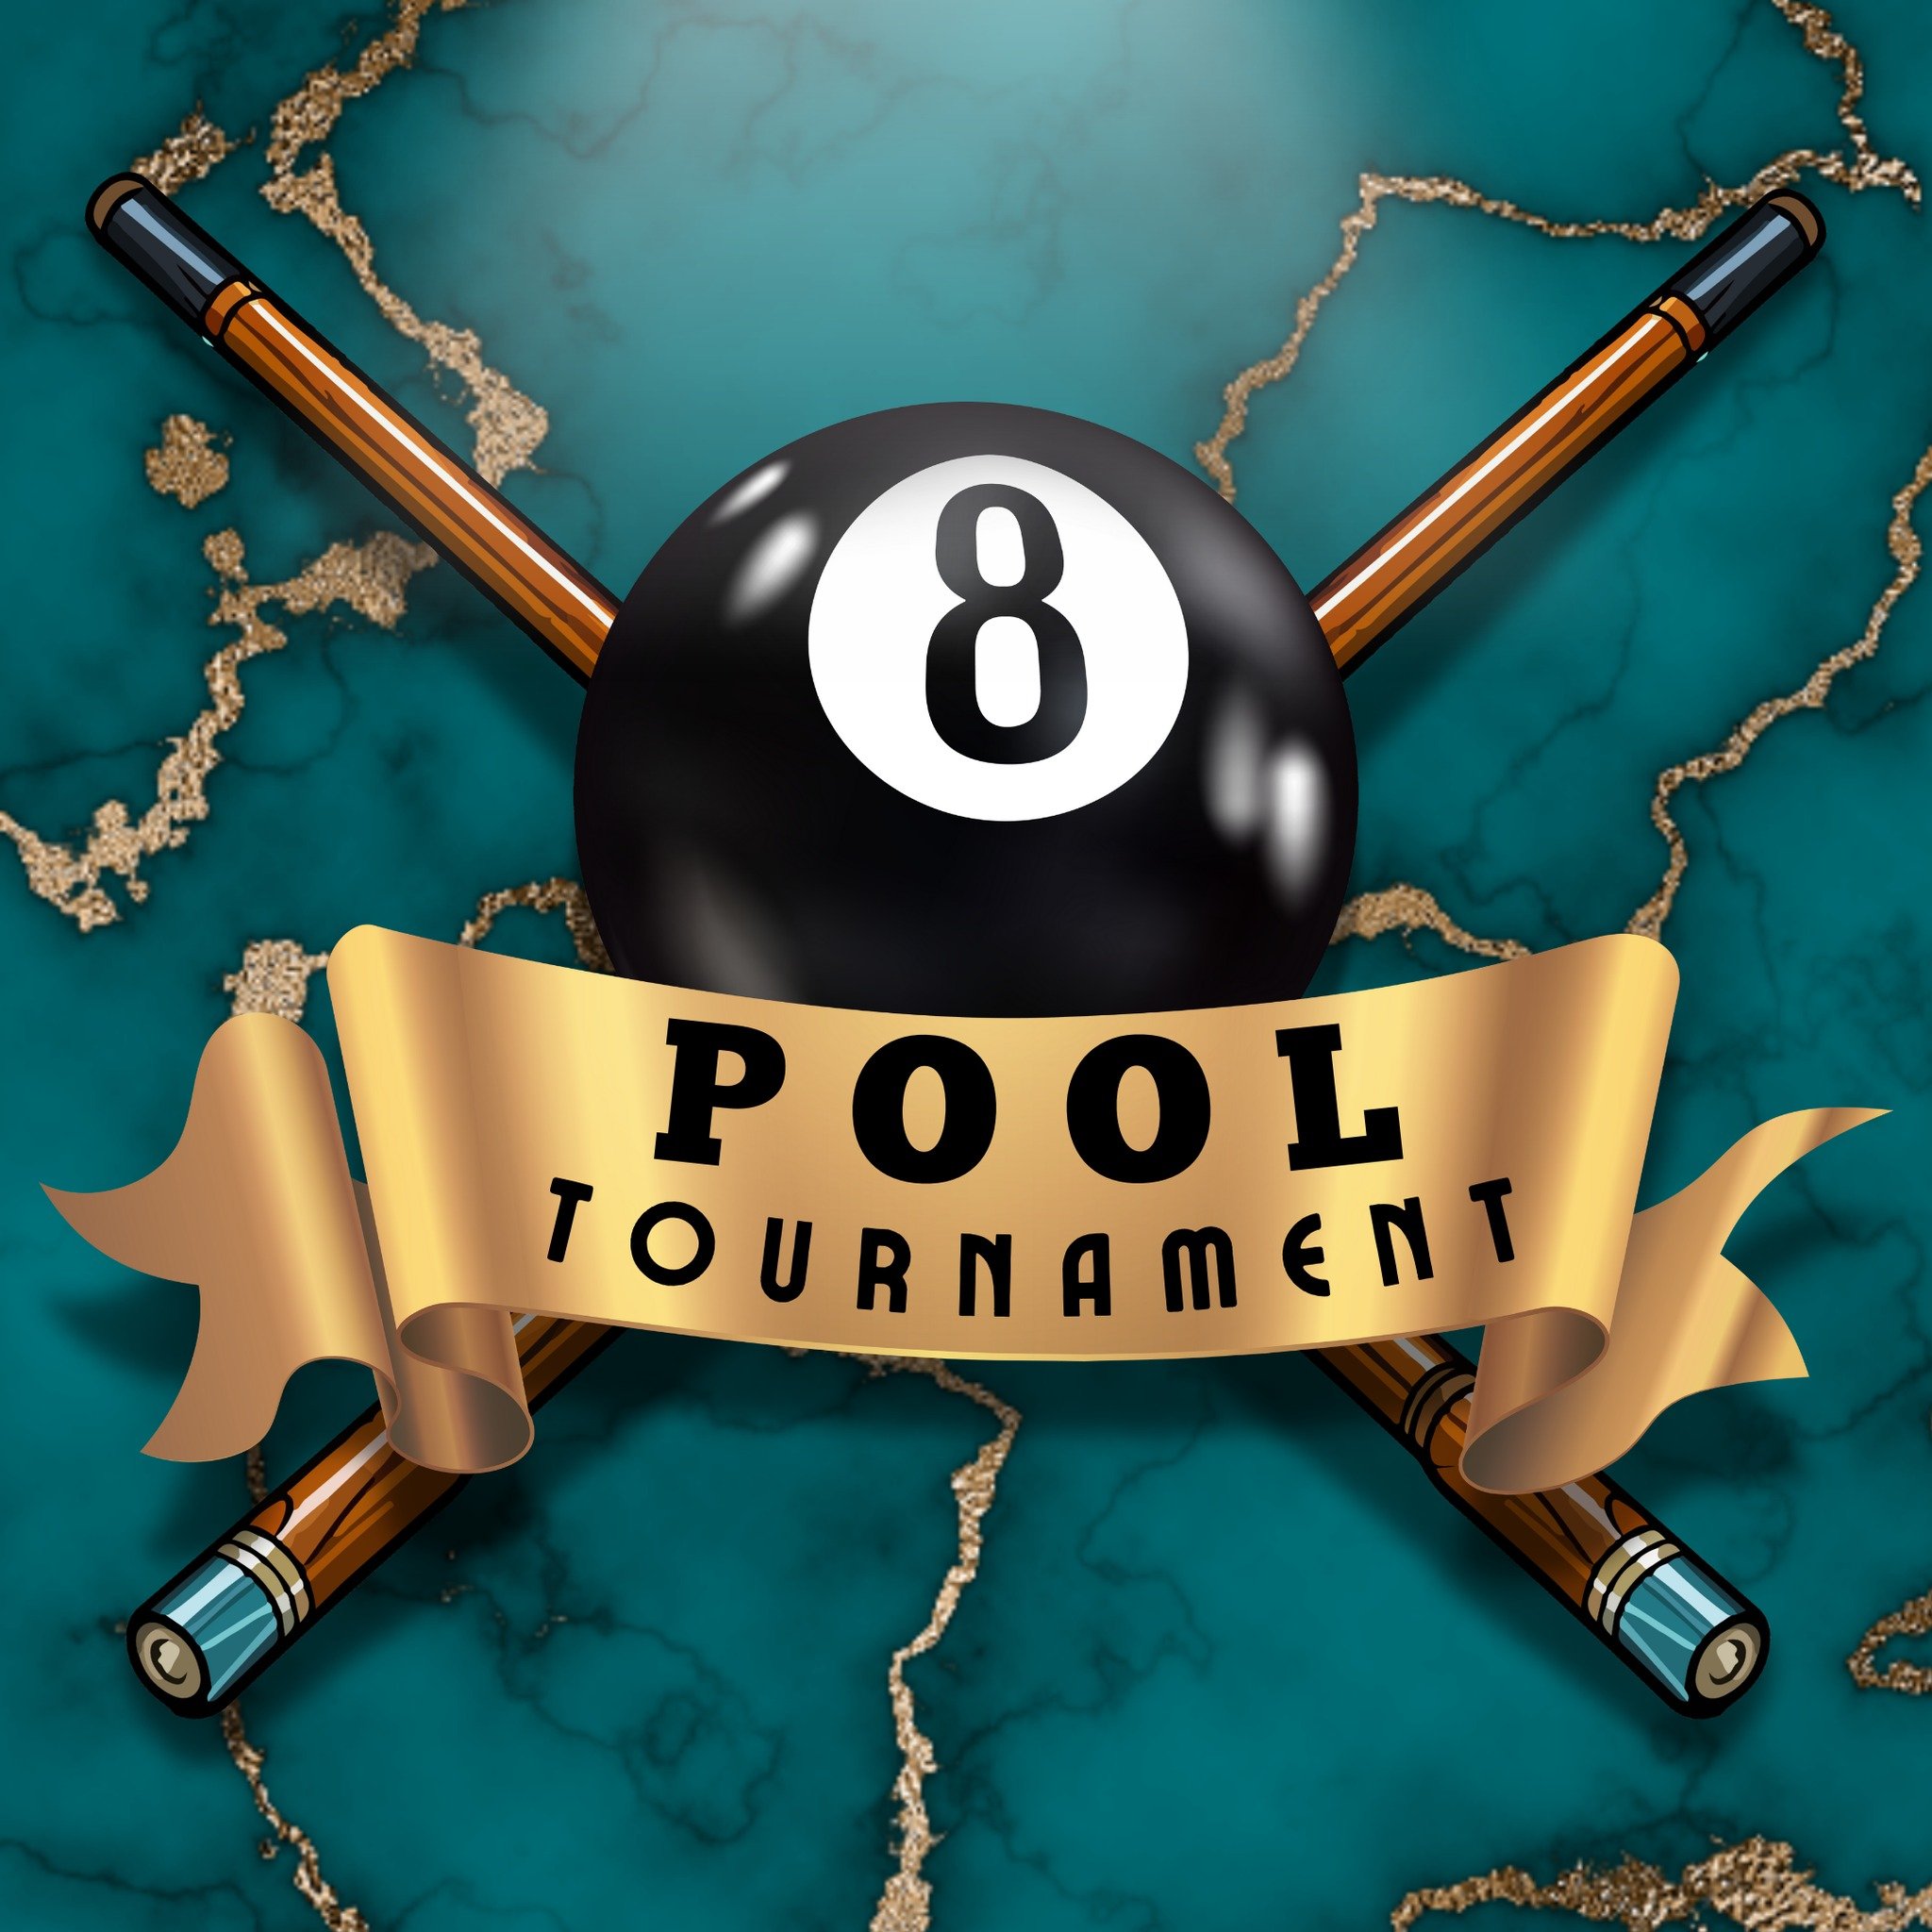 🎱🏆 Monday Night Pool Tournament! 🏆🎱

Rack 'em up and join us for our thrilling Monday Night Pool Tournament!

🕖 Free play kicks off at 7 PM, with the tournament starting promptly at 8 PM.
💰 Entry fee: $5 buy-in, winner takes all!
💵 Plus, don't